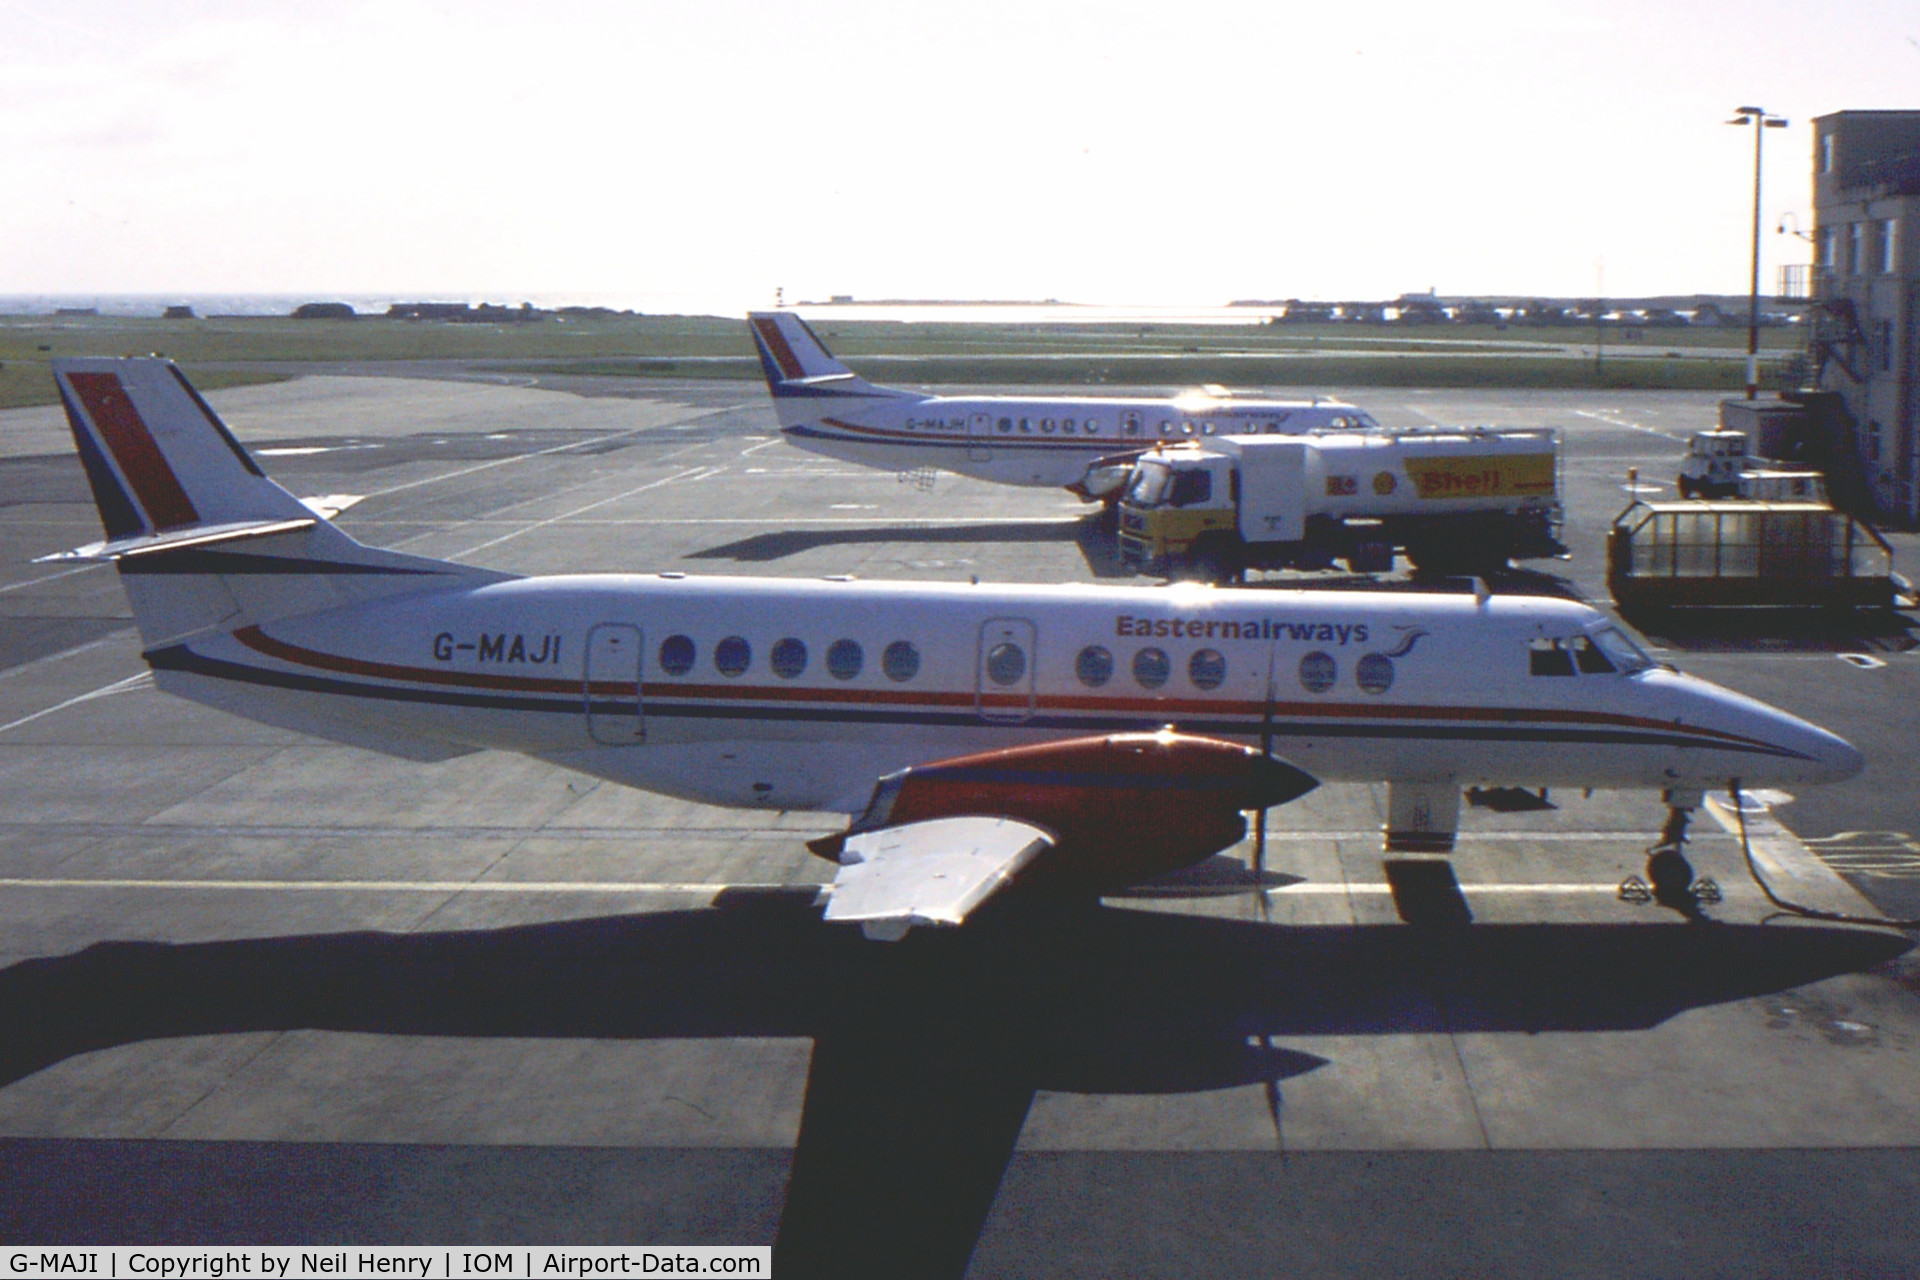 G-MAJI, 1993 British Aerospace Jetstream 41 C/N 41011, scanned from slide taken at Isle-of-Man-airport in April 2004. View shows two sister aircraft: G-MAJH and G-MAJI in Eastern Airways livery